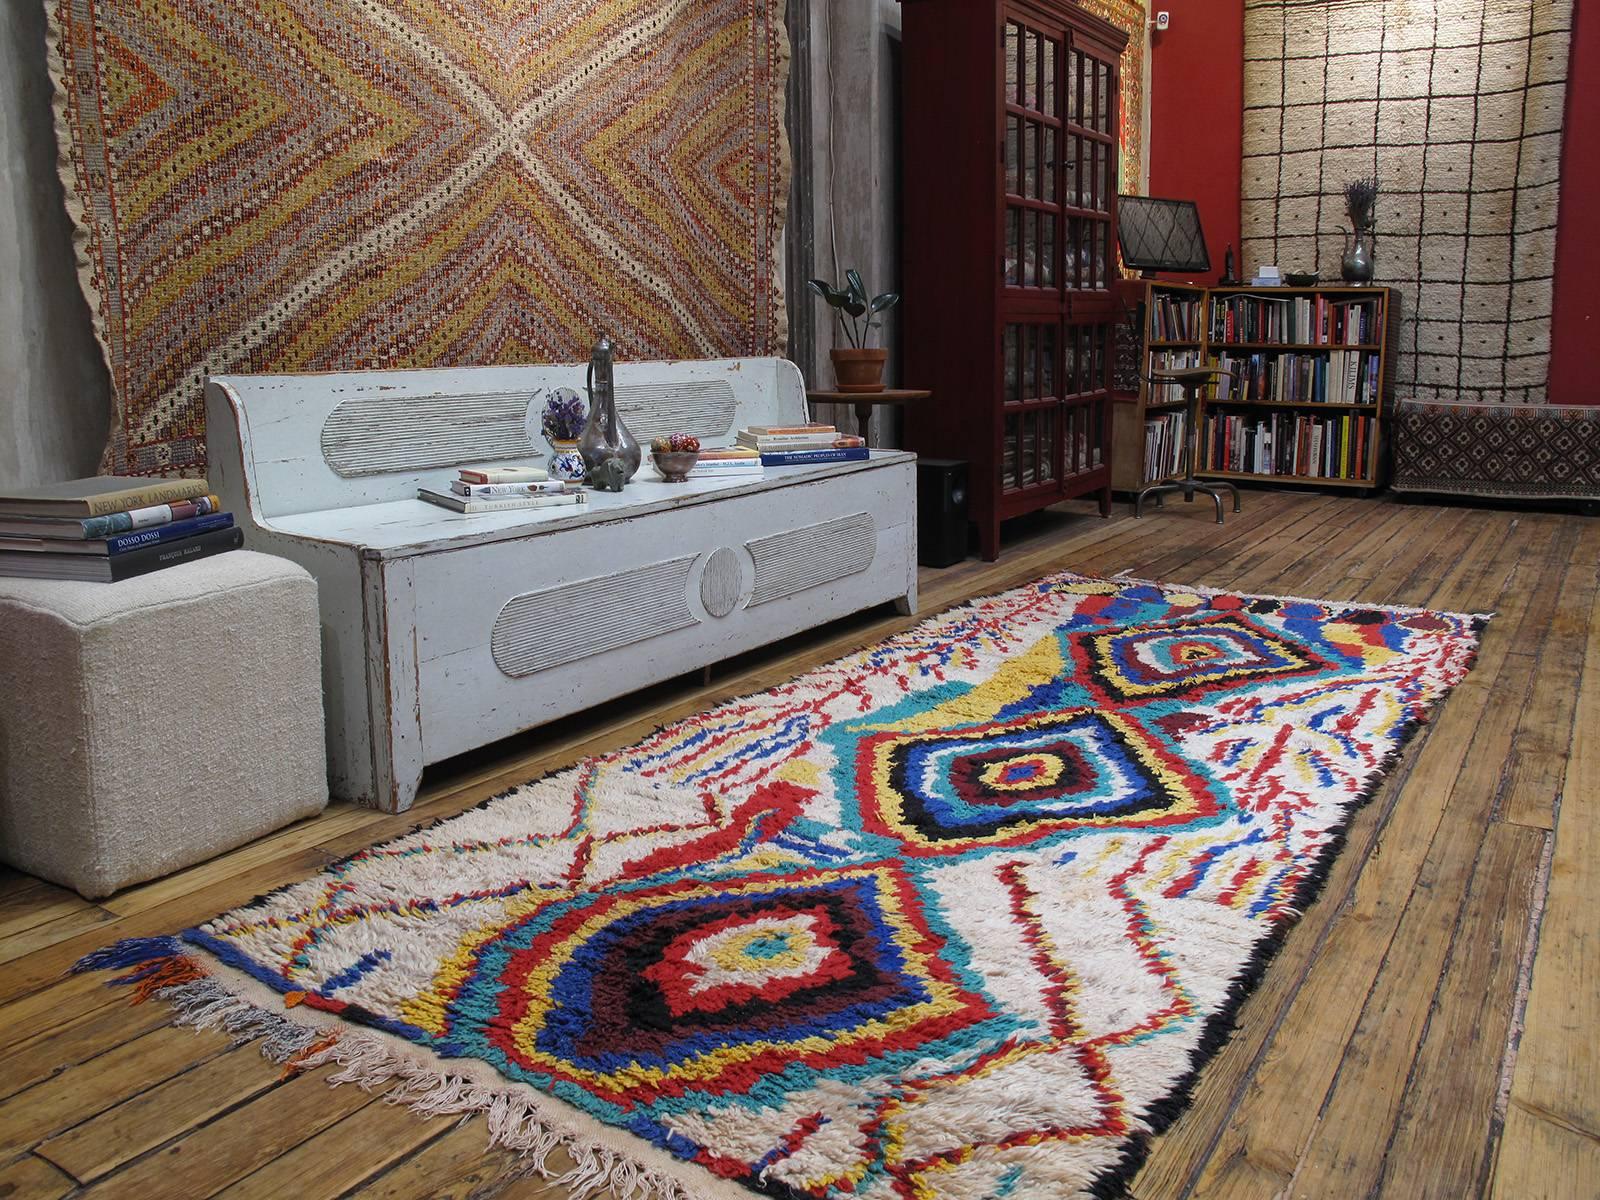 A striking Moroccan Berber rug from the Azilal province in the Central High Atlas Mountains with a bold design, vibrant colors and larger-than-usual size.

The rugs of this remote region have remained a relative secret until recently. The area